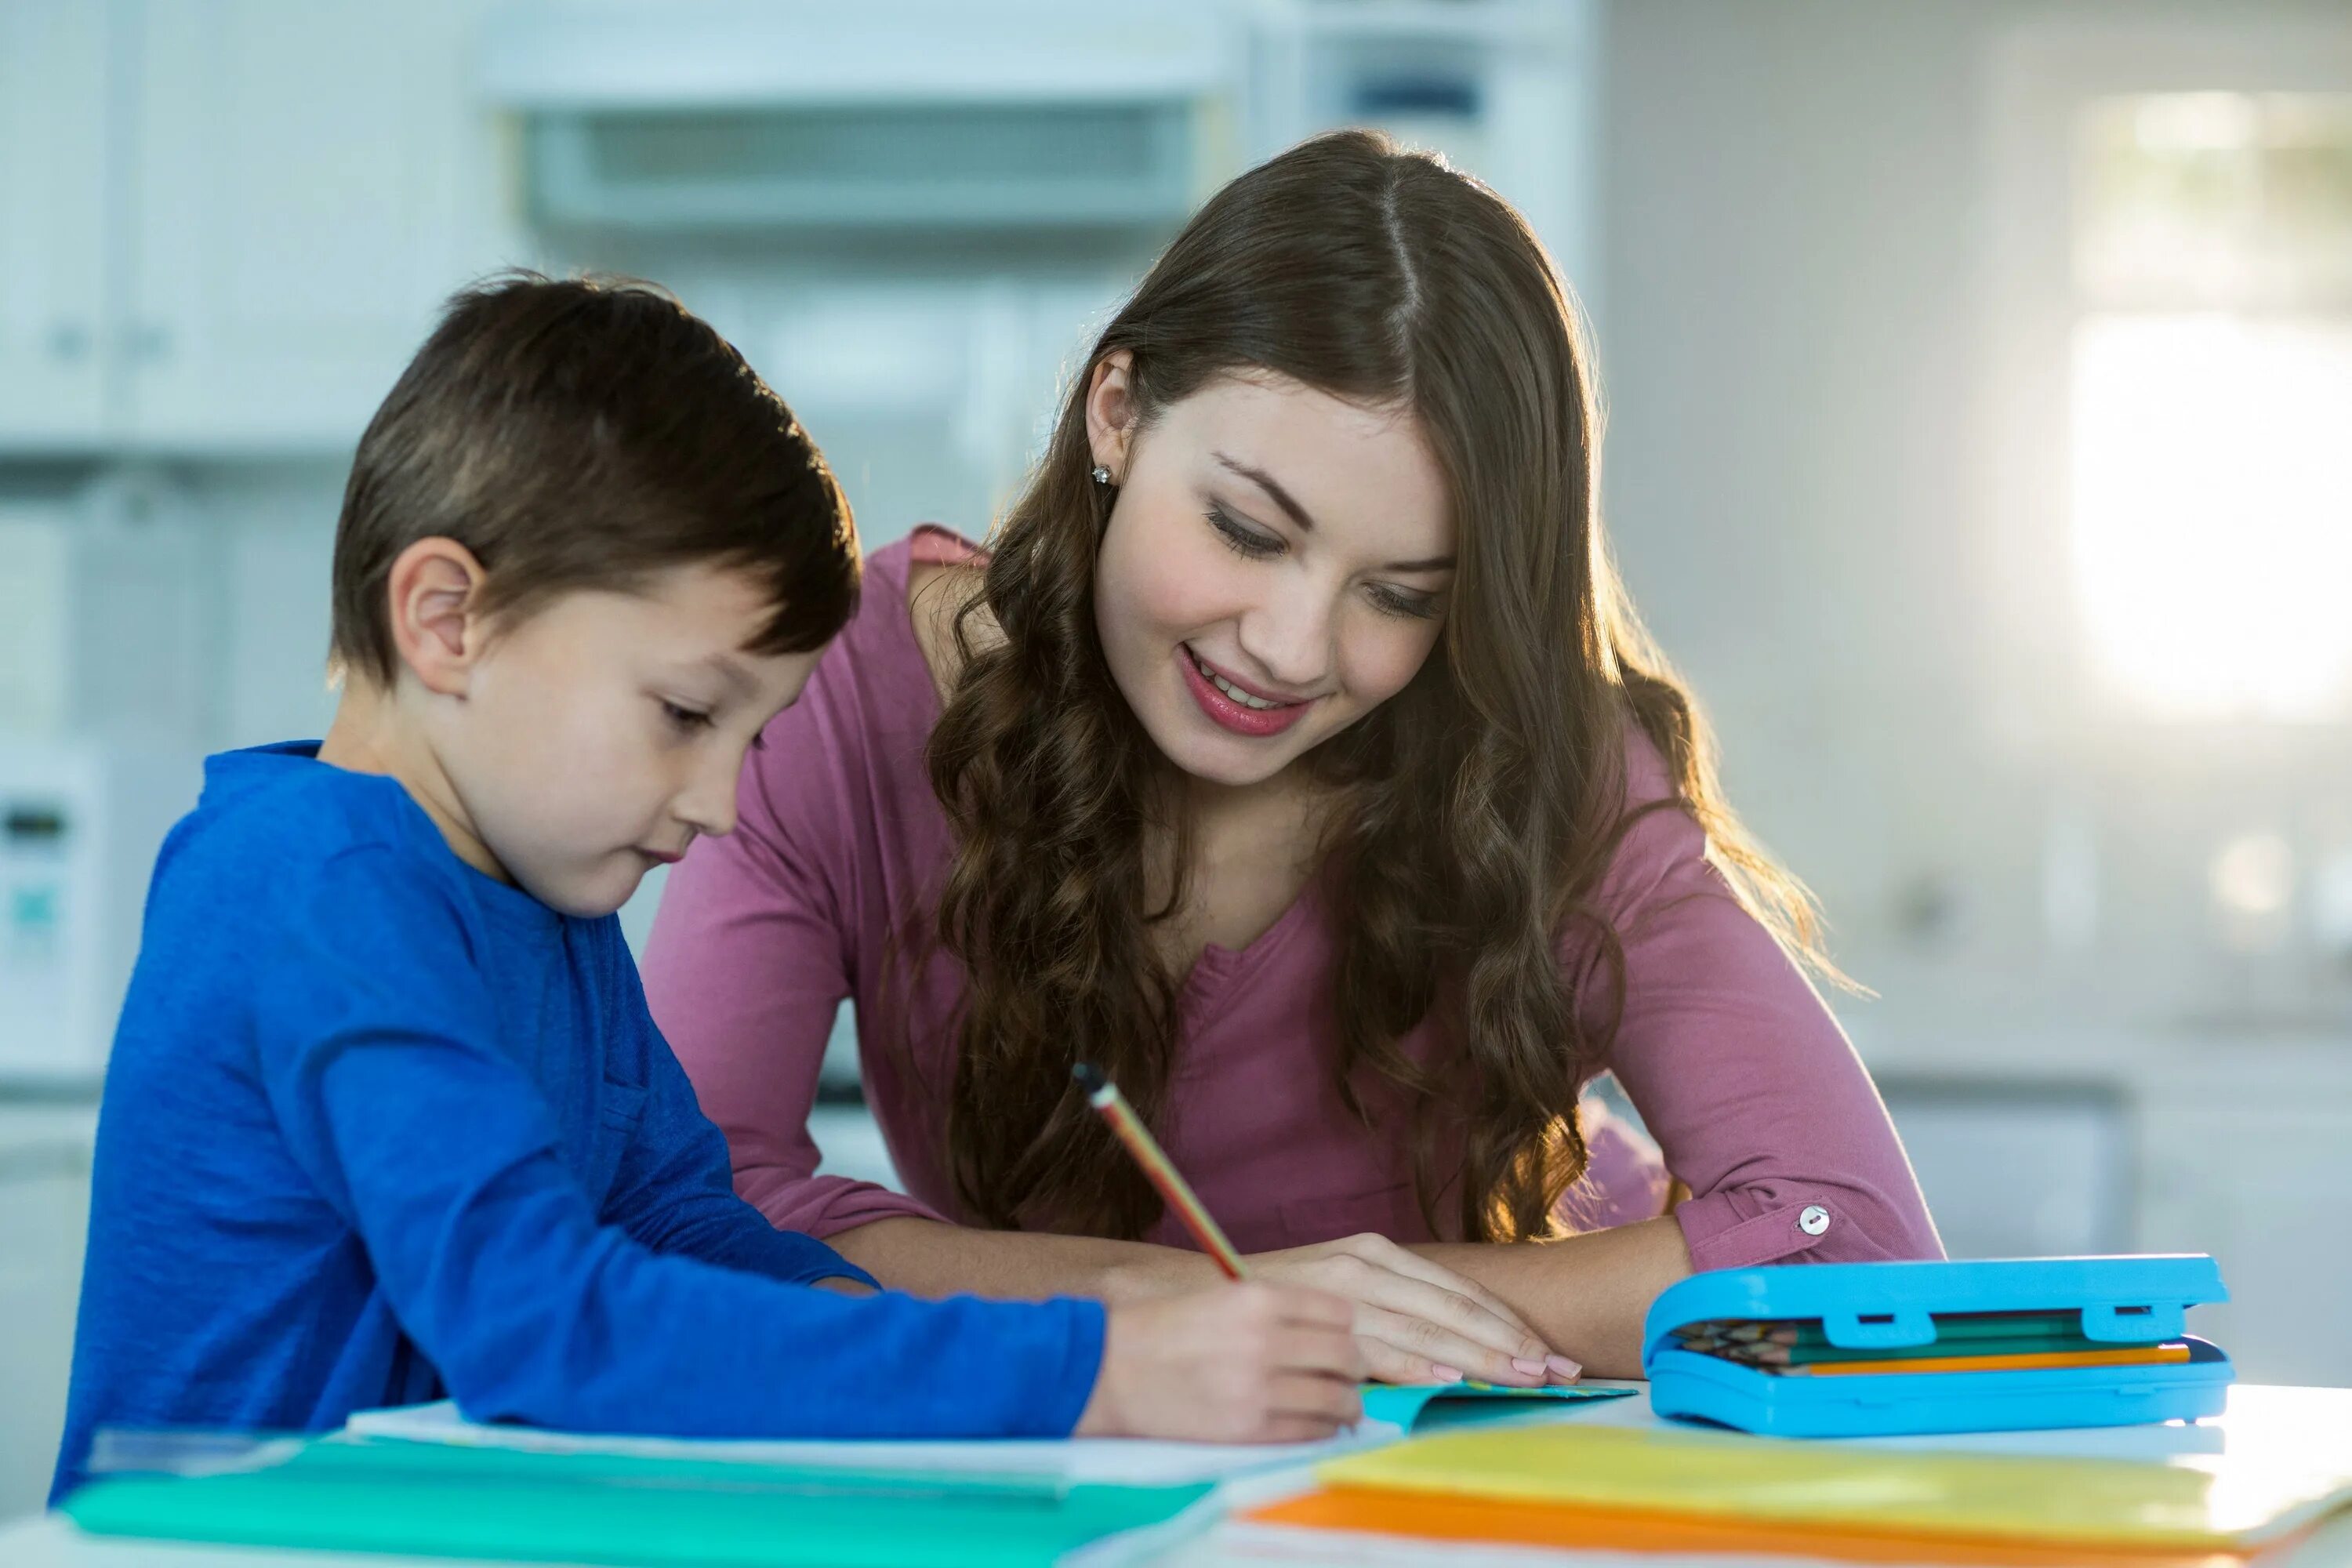 She to help many times. Children and mother do homework. Мама с сыном делают домашнее задание. Mother and child doing homework. Help mother homework.